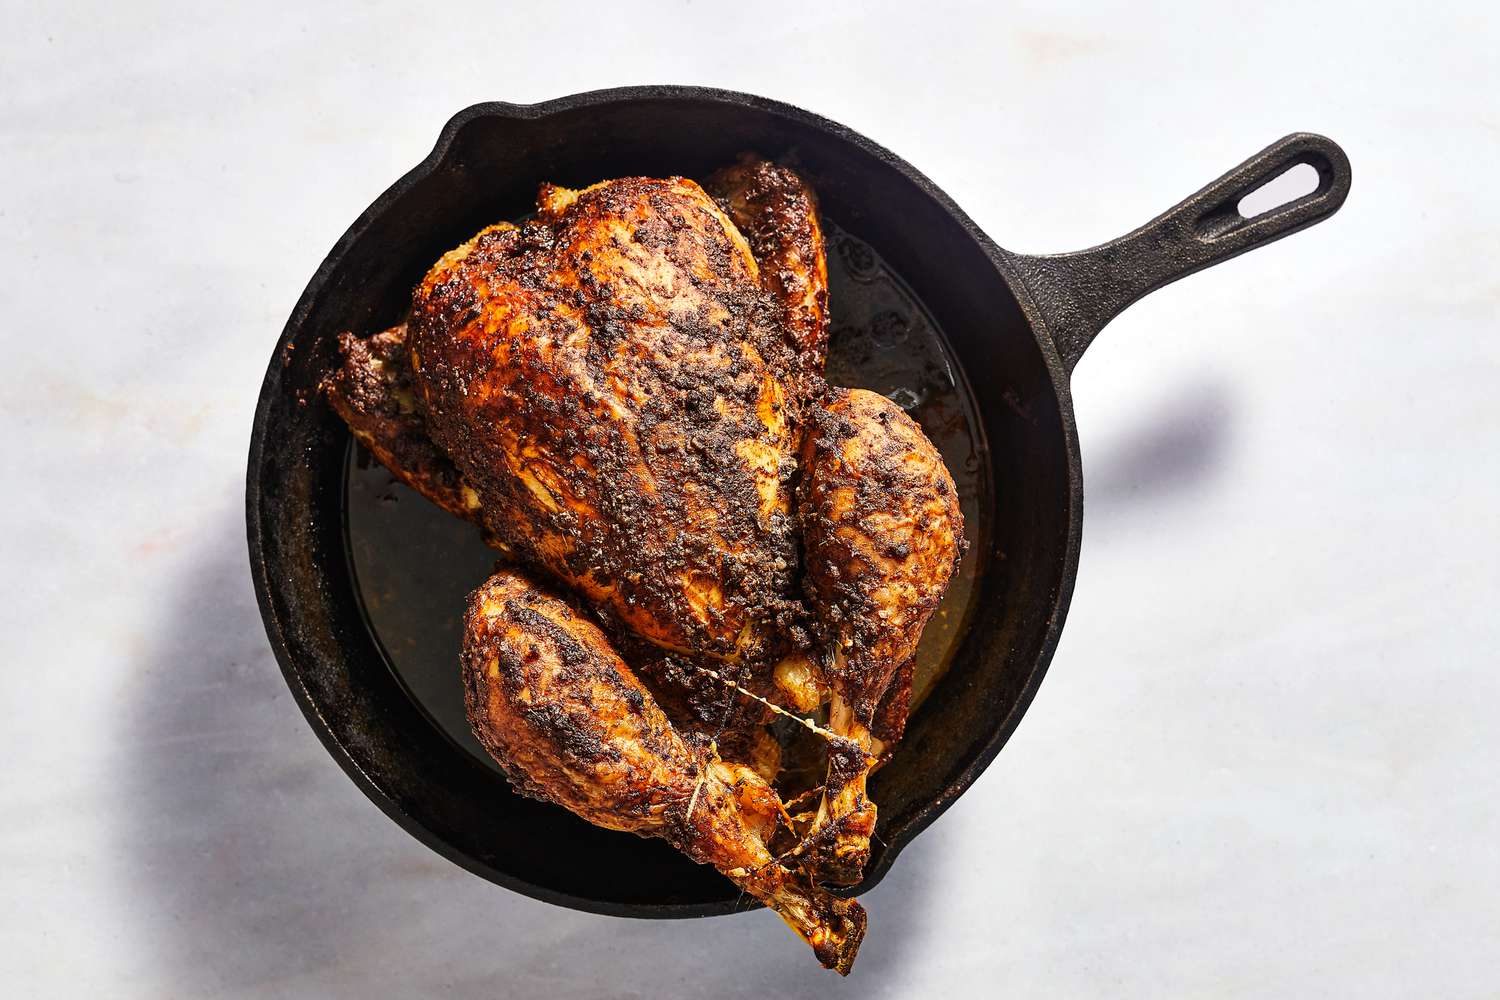 A whole roasted chicken, coated with oil-spice mixture, trussed, in a cast iron skillet